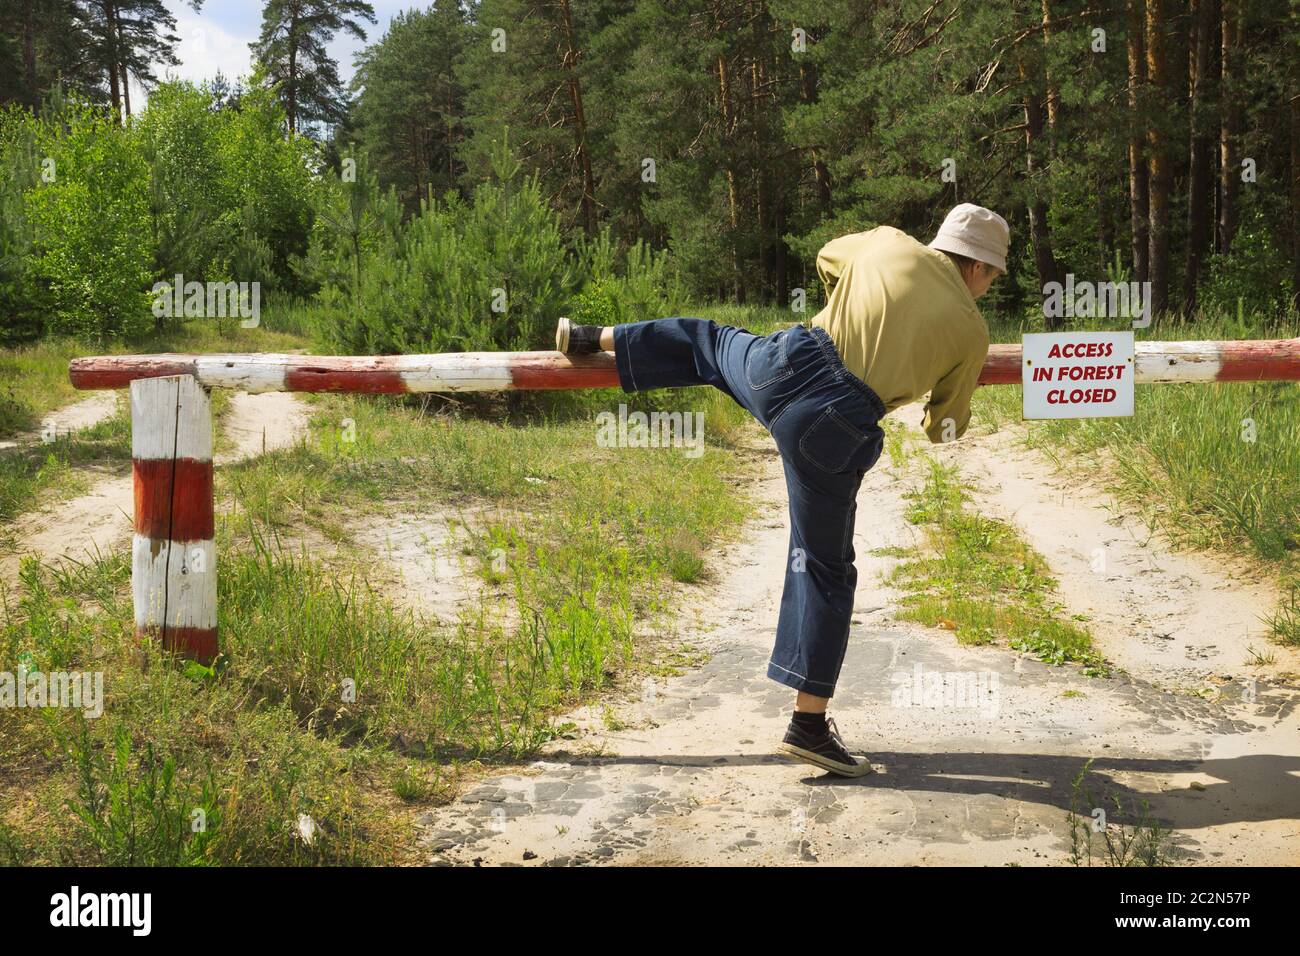 Man overcomes barrier in fire-dangerous period, ignoring ban Stock Photo